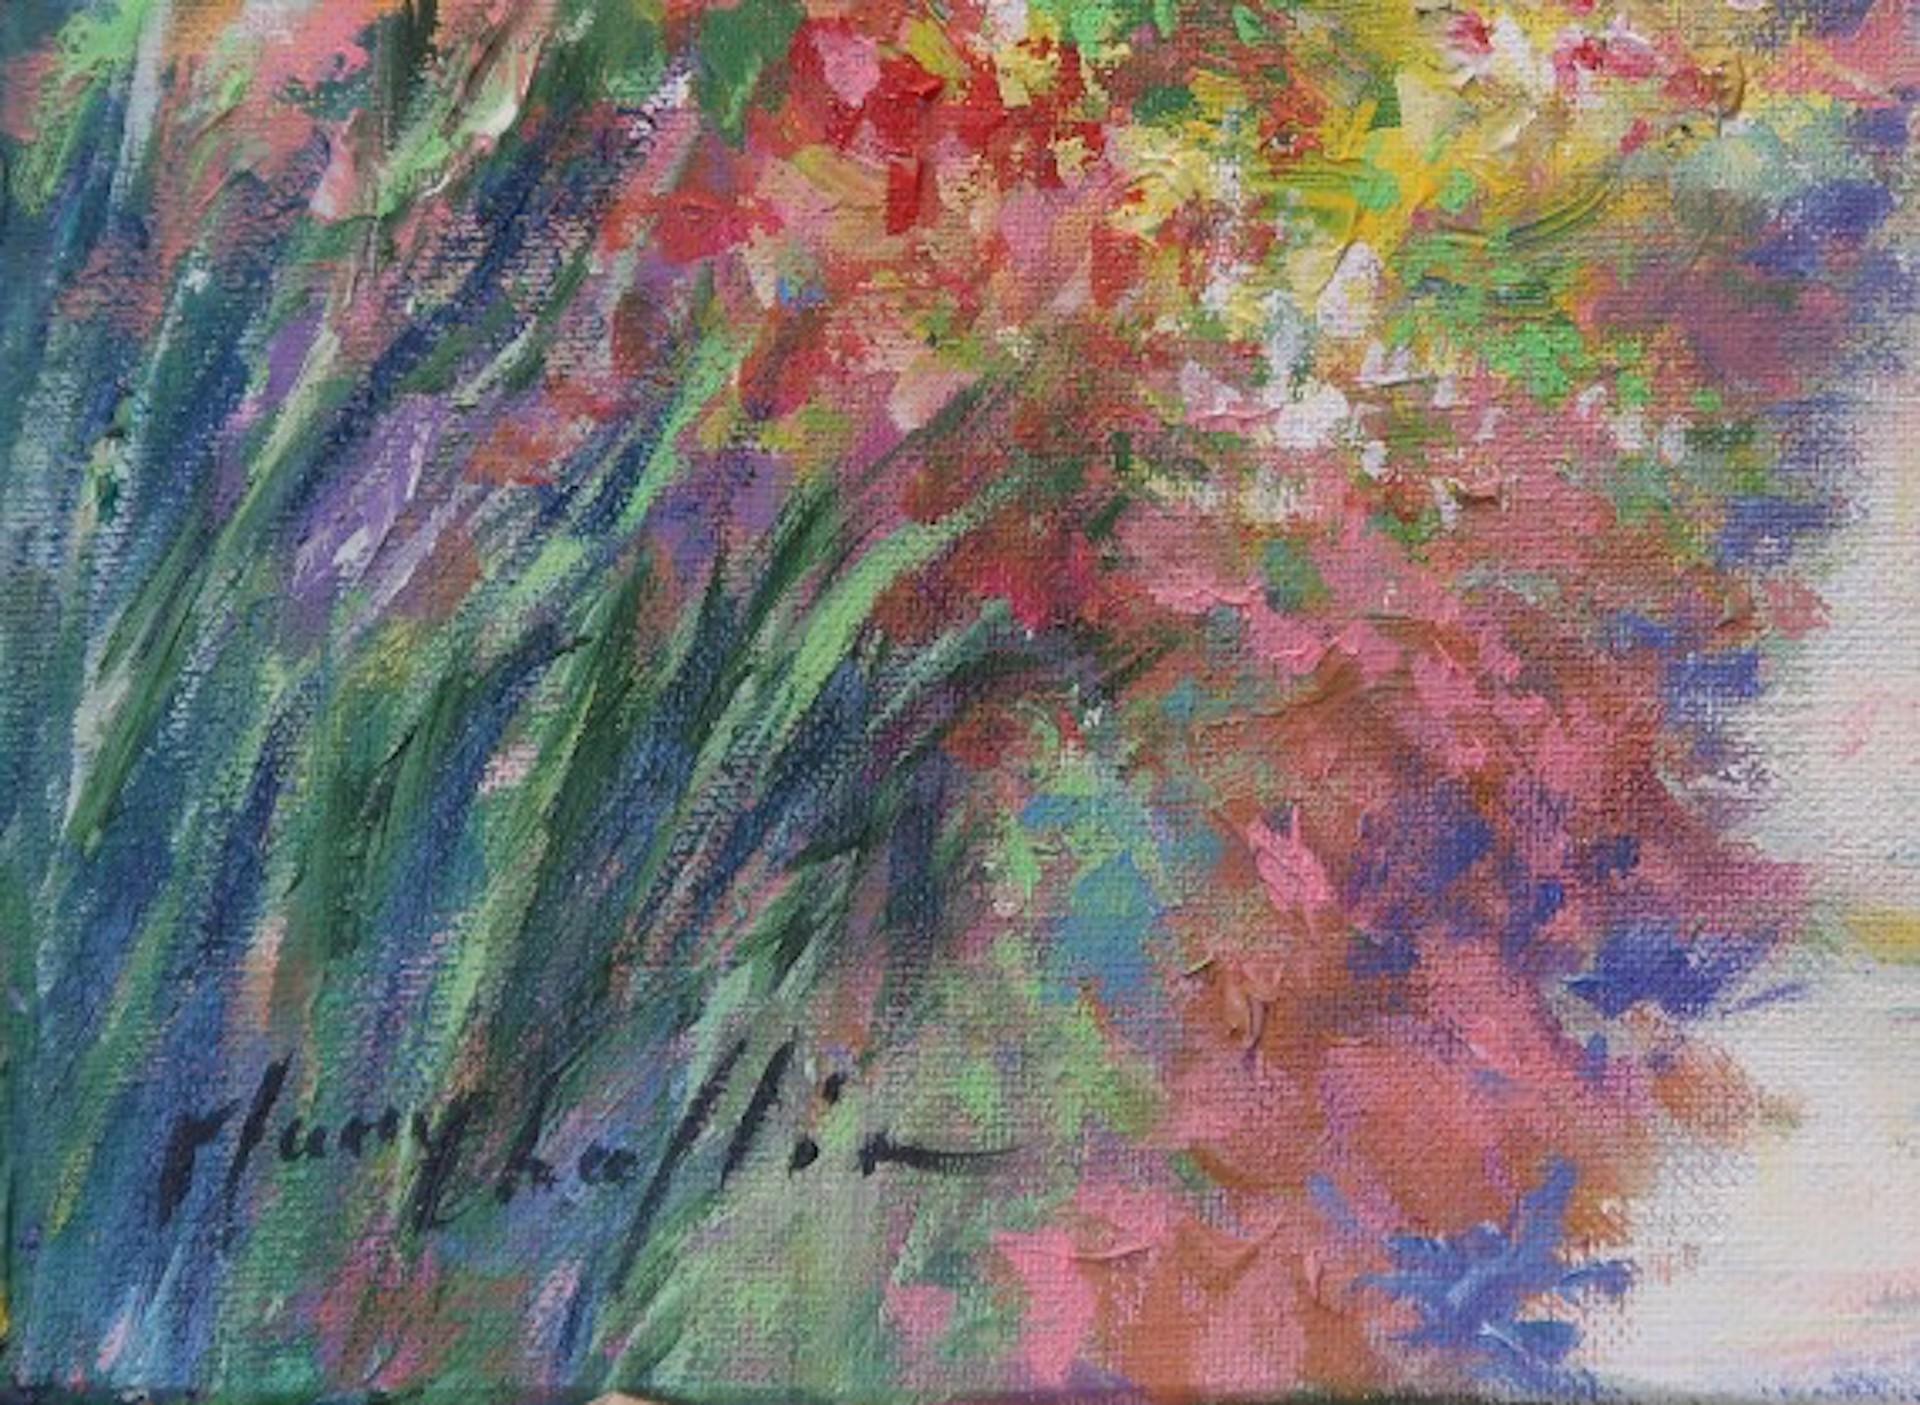 Mary Chaplin Rose Time at Monet’s garden [2021]
original
signed by the artist
acrylic
Image size: H:55,5 cm x W:46,5 cm
Complete Size of Unframed Work: H:55,5 cm x W:46,5 cm x D:2,5cm

Sold Unframed

Please note that insitu images are purely an